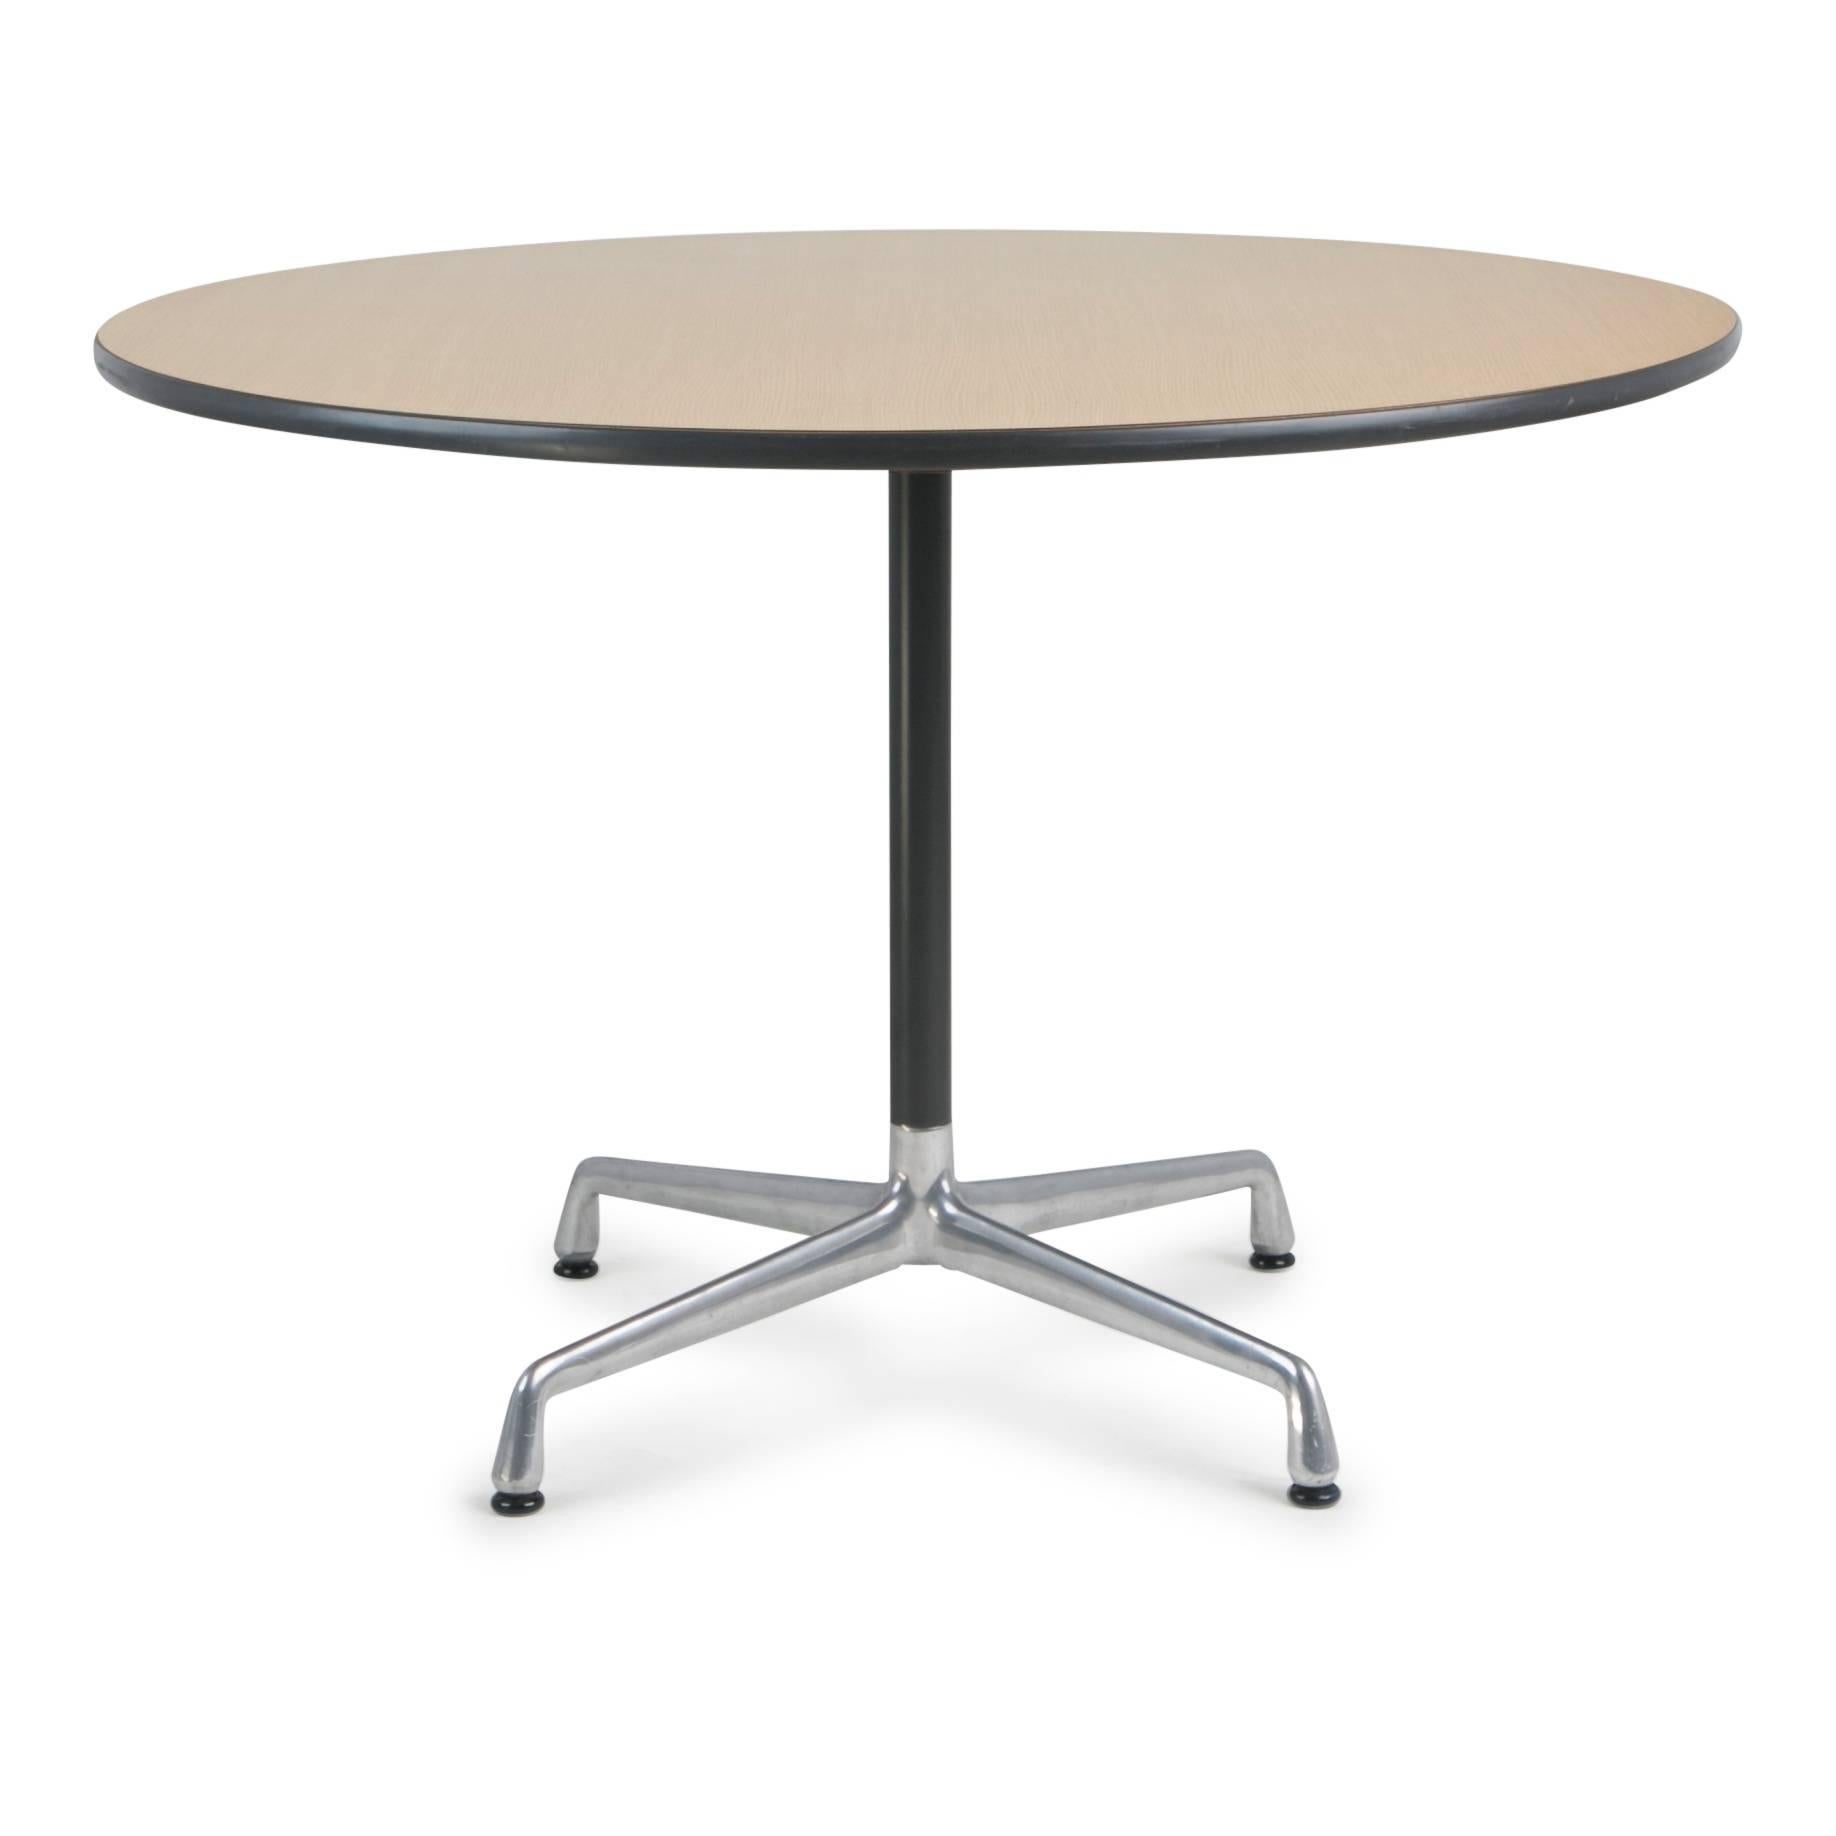 Herman Miller Aluminum Group dining or cafe table designed by Charles and Ray Eames, circa 1970. This minimalistic table is comprised of an aluminum pedestal four-star base with a wood laminate top. The size is perfect for a kitchen or breakfast